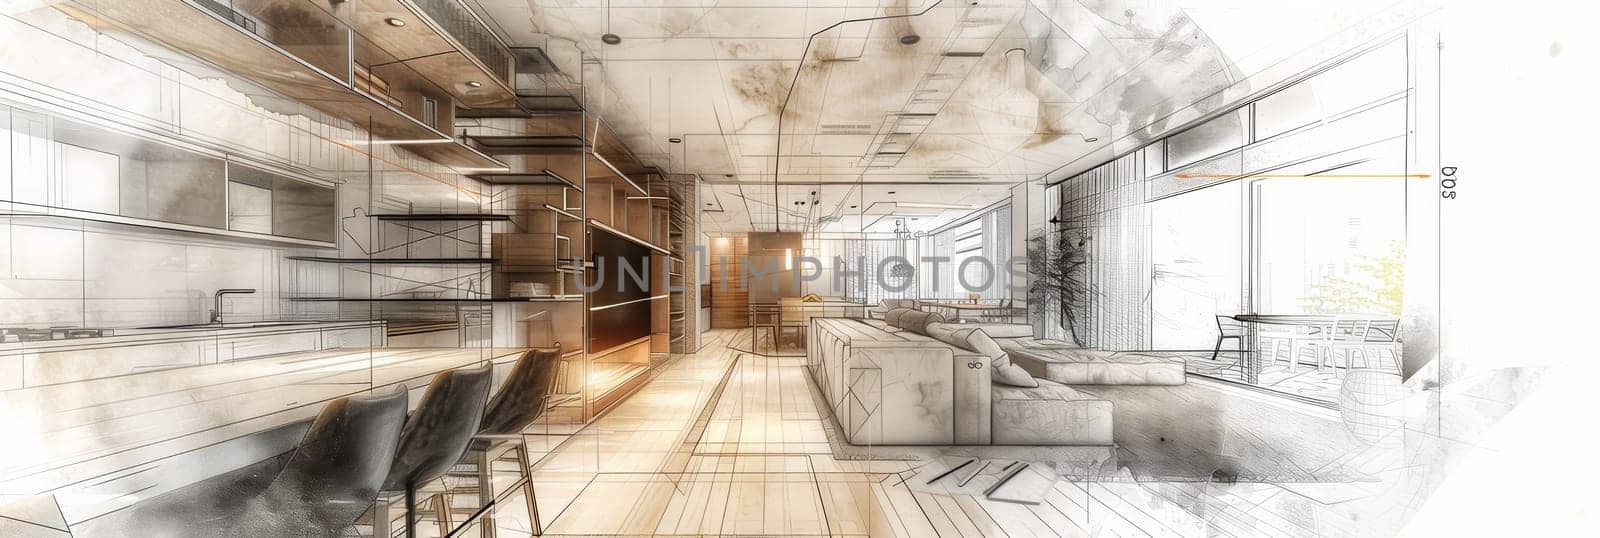 This drawing showcases a beautifully designed kitchen merging seamlessly into a cozy living room, complete with stylish furnishings and intricate details.